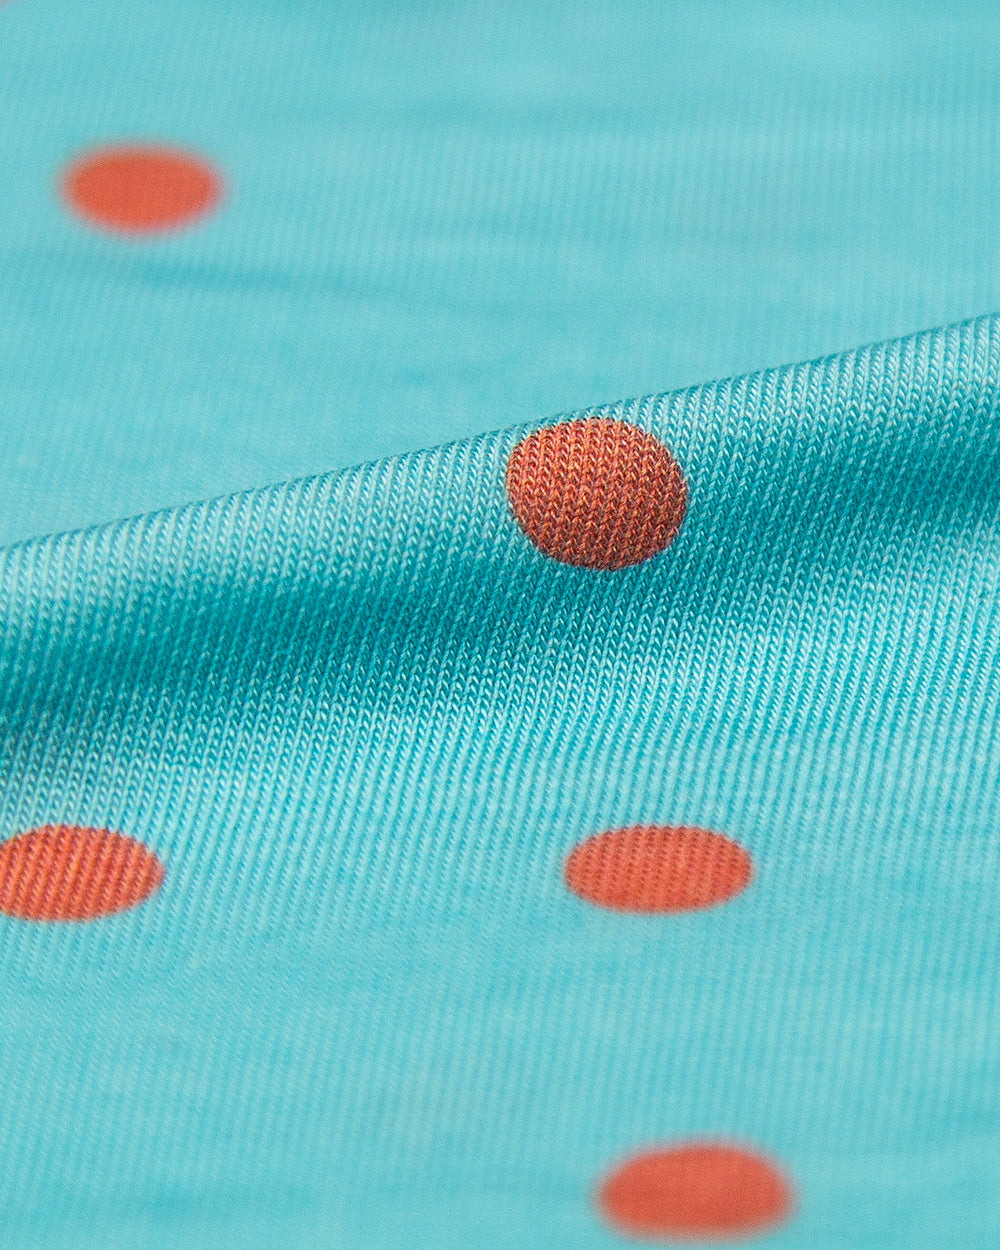 High Rise Knicker - Turquoise and Coral Spots Stripe & Stare